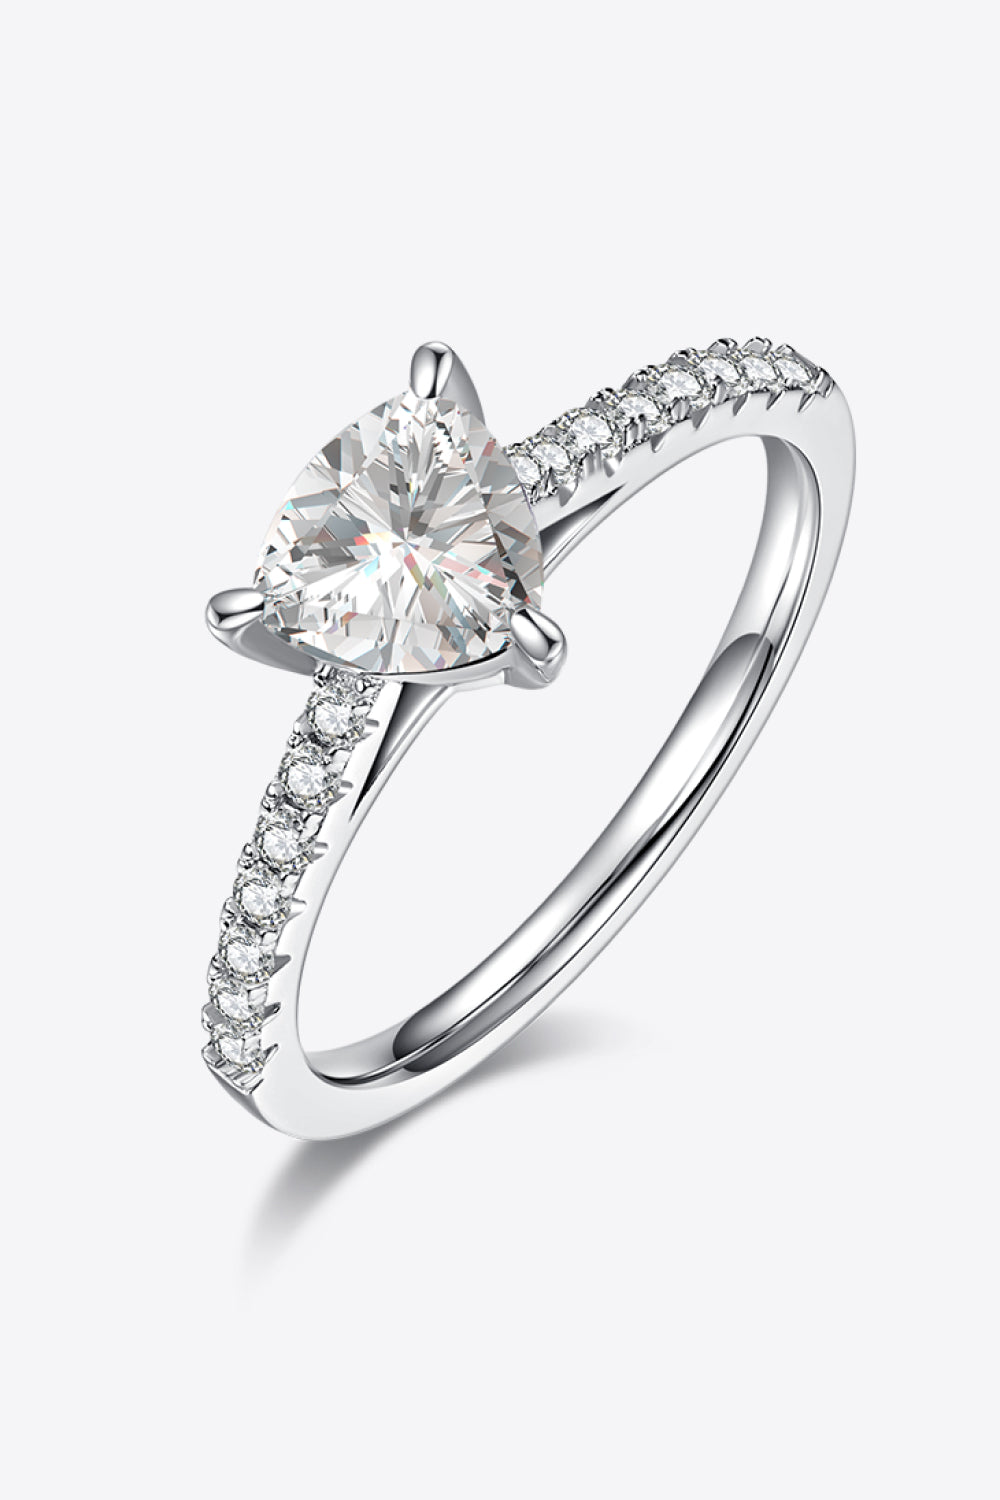 1 Carat Moissanite Triangle 925 Sterling Silver Ring - AllIn Computer